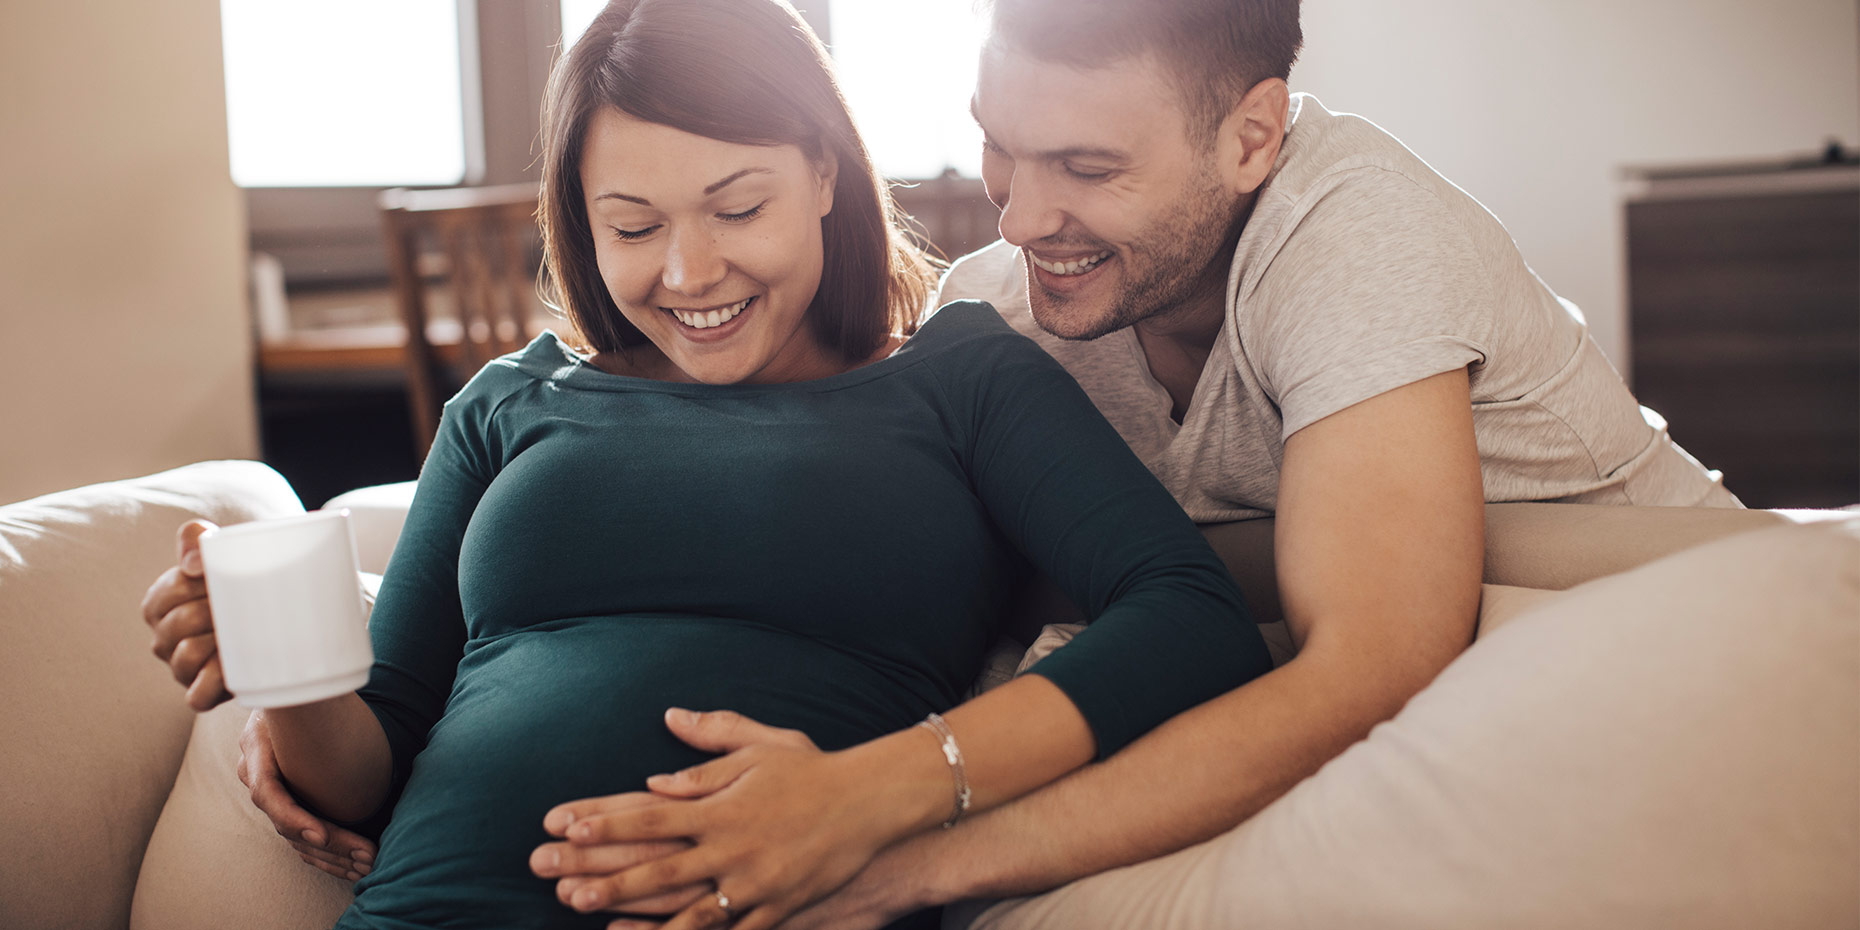 Pregnant woman smiling hands on belly looking down man beside her smiling